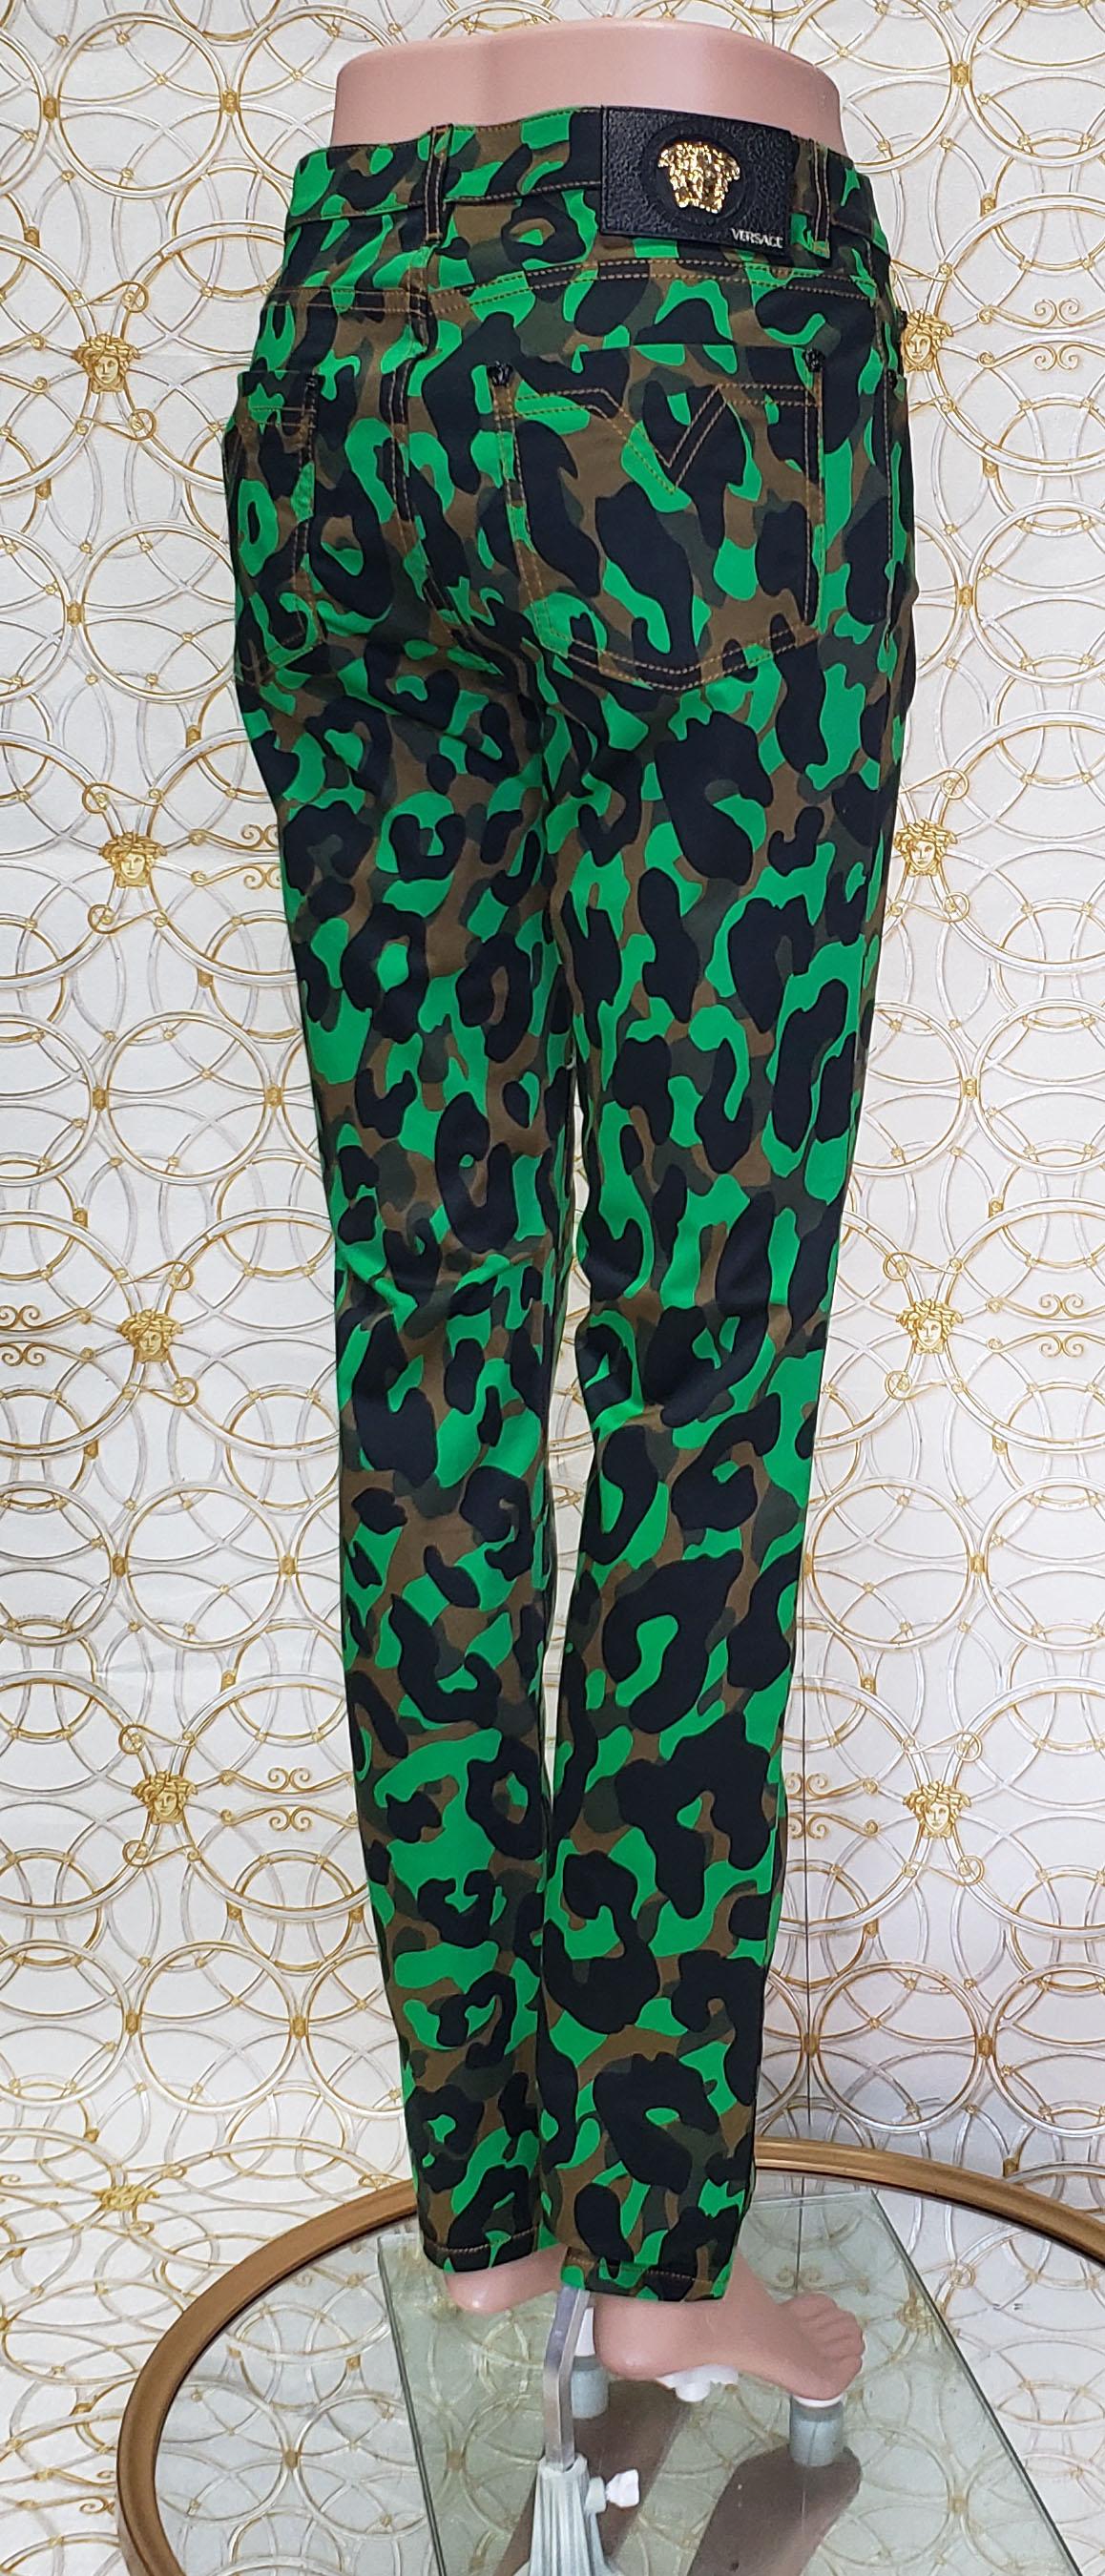 Women's S/S 2016 VERSACE GREEN MILITARY PANTS size 28 For Sale